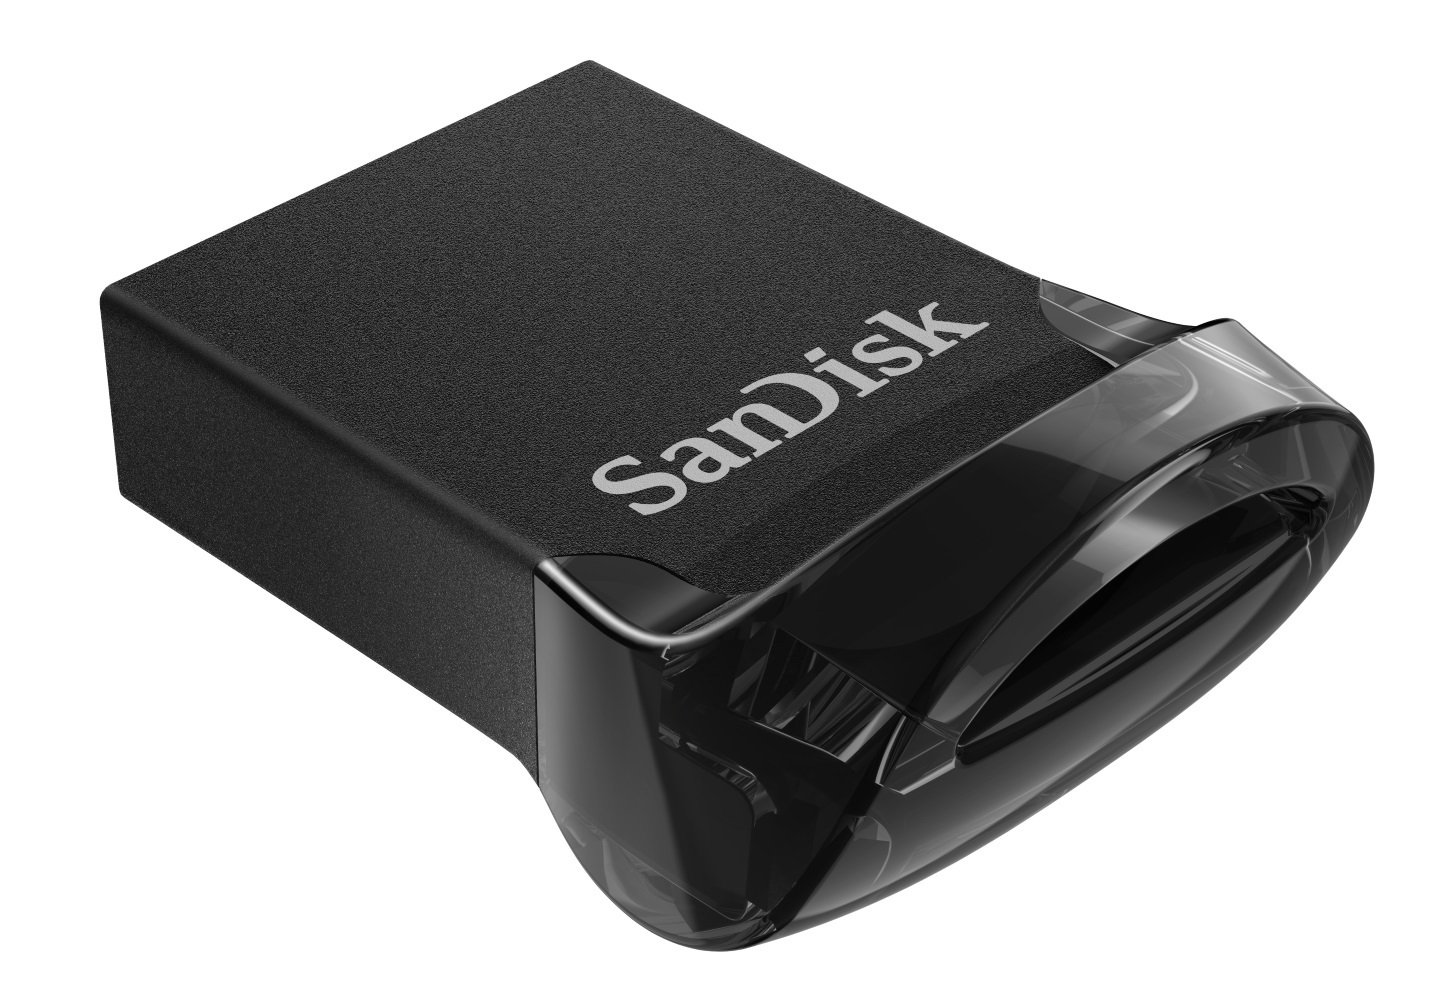 SanDisk Ultra Fit USB 3.1 Flash Drive Review